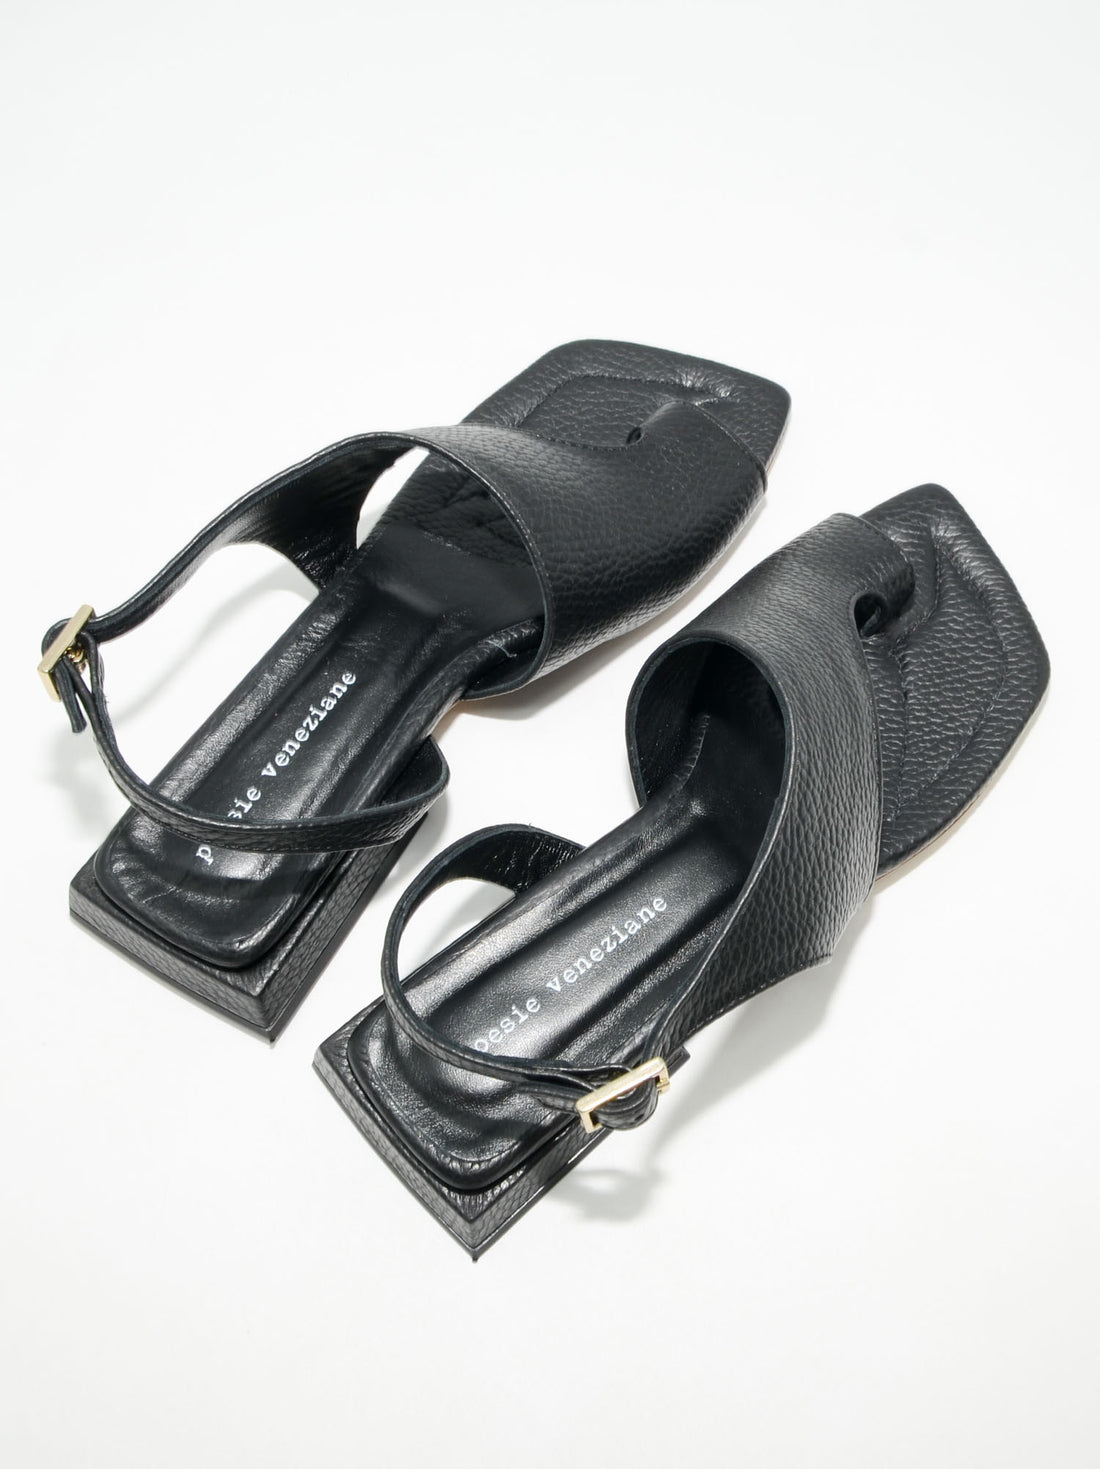 MS13 LEATHER SANDALS